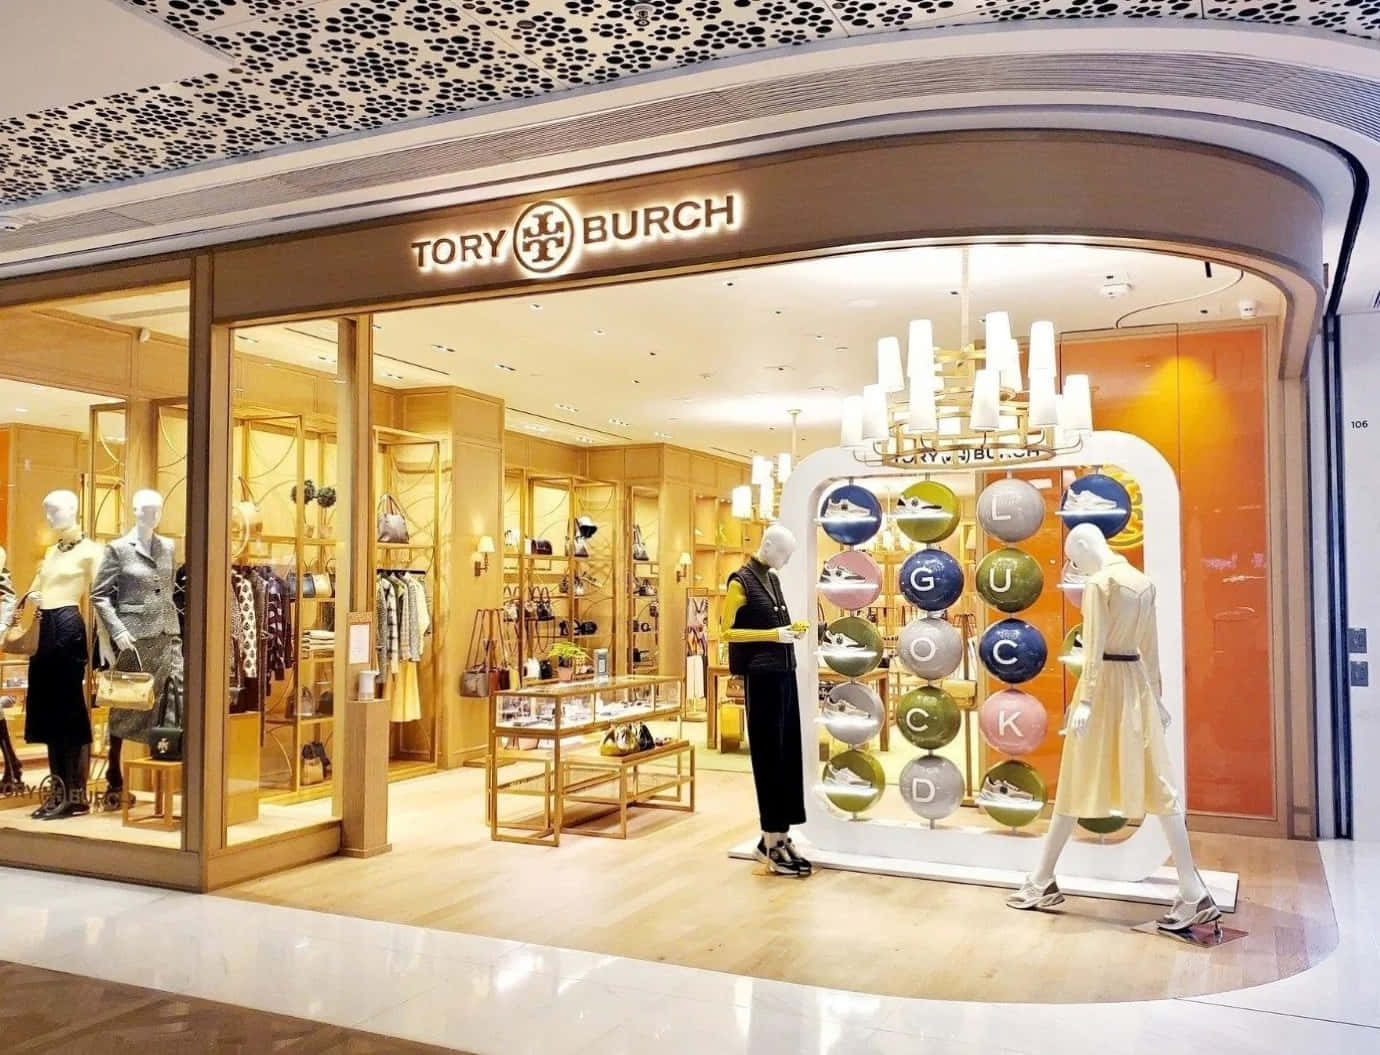 Look chic and sophisticated with the iconic designs of Tory Burch.